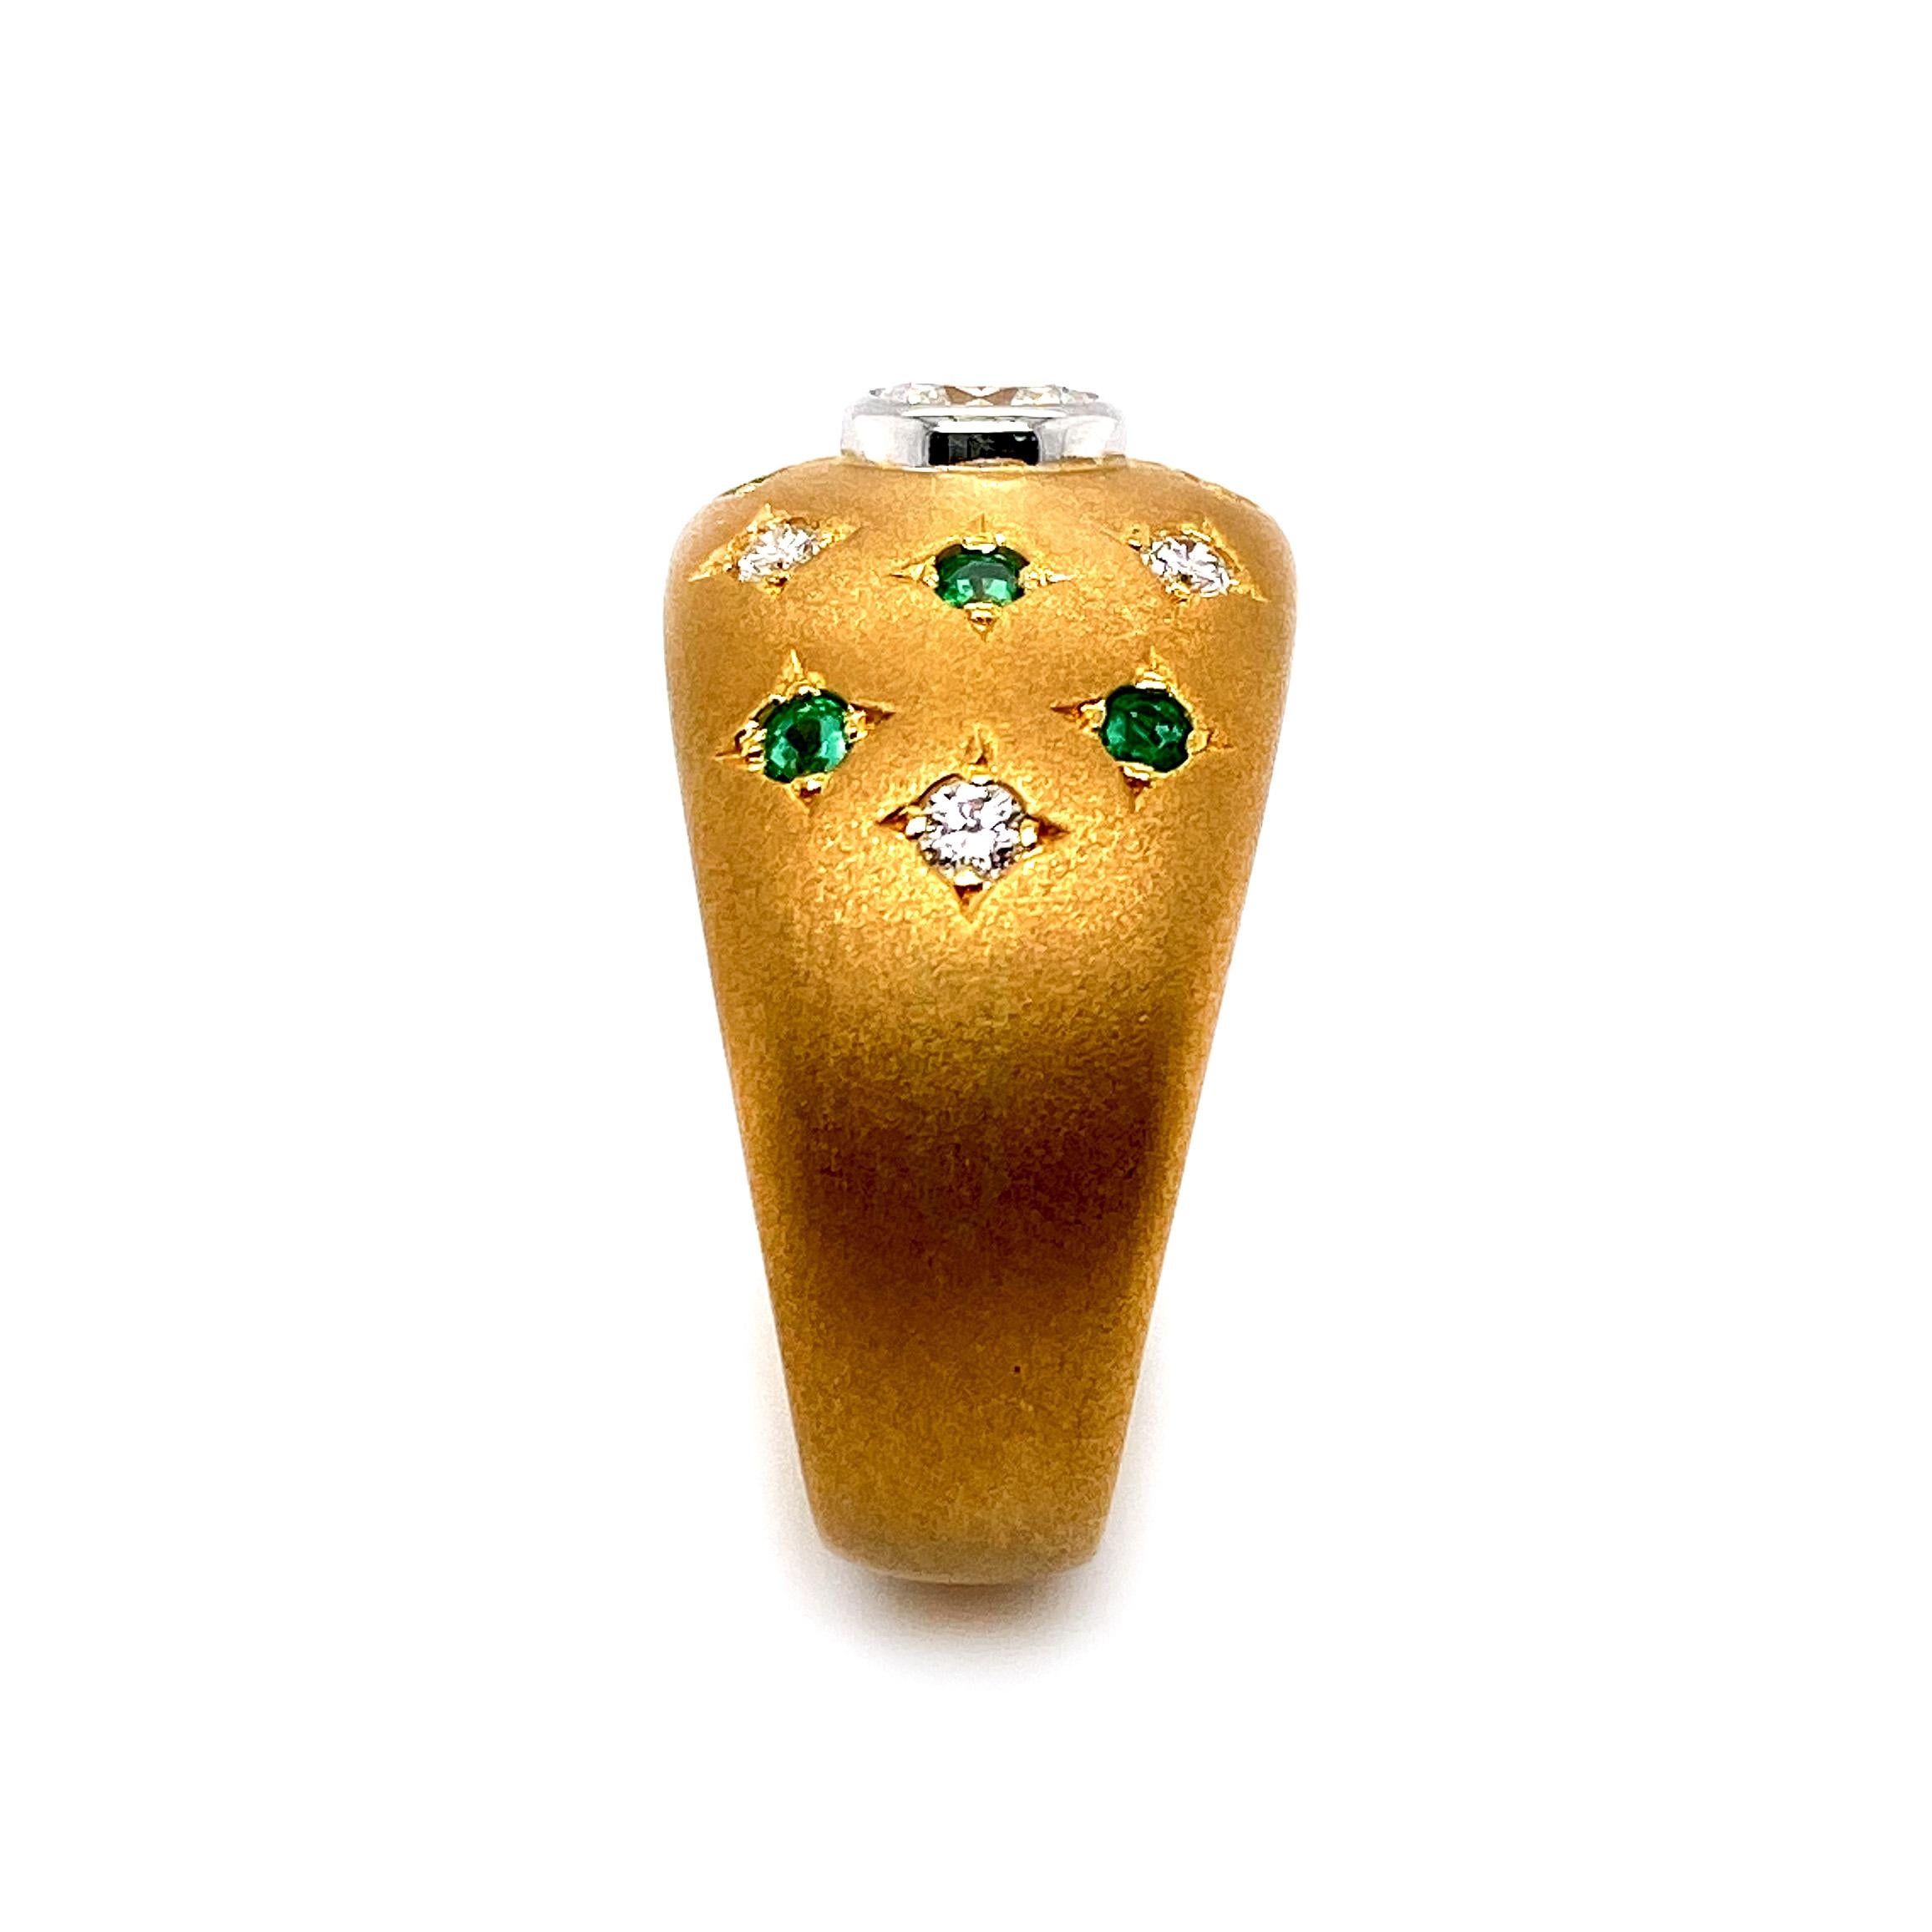 Round Cut Starry Diamond and Emerald Artisanal Dome Ring in 18 Karat Gold